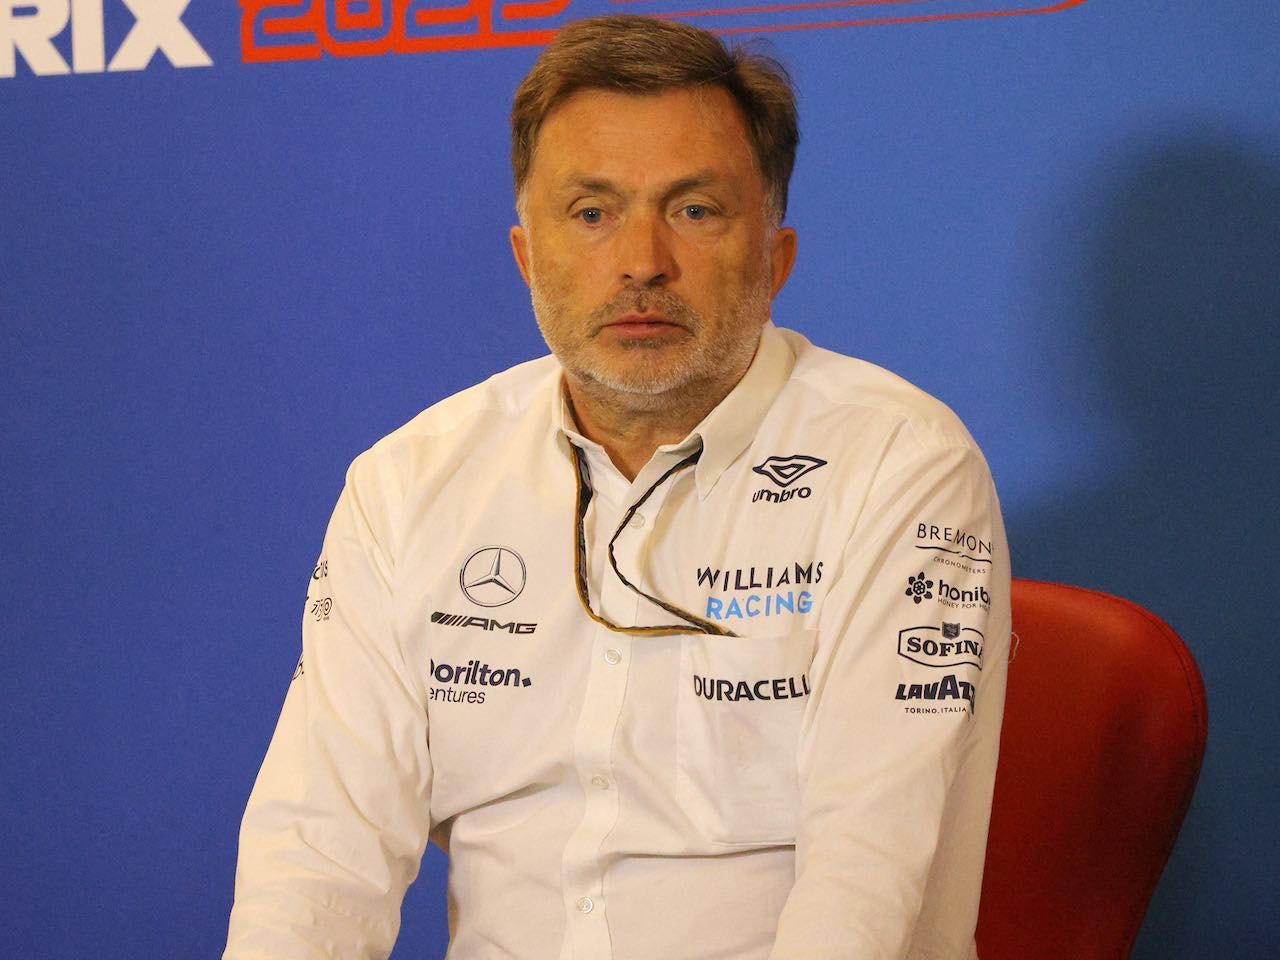 Serving as F1 boss was 'exhausting' - Capito